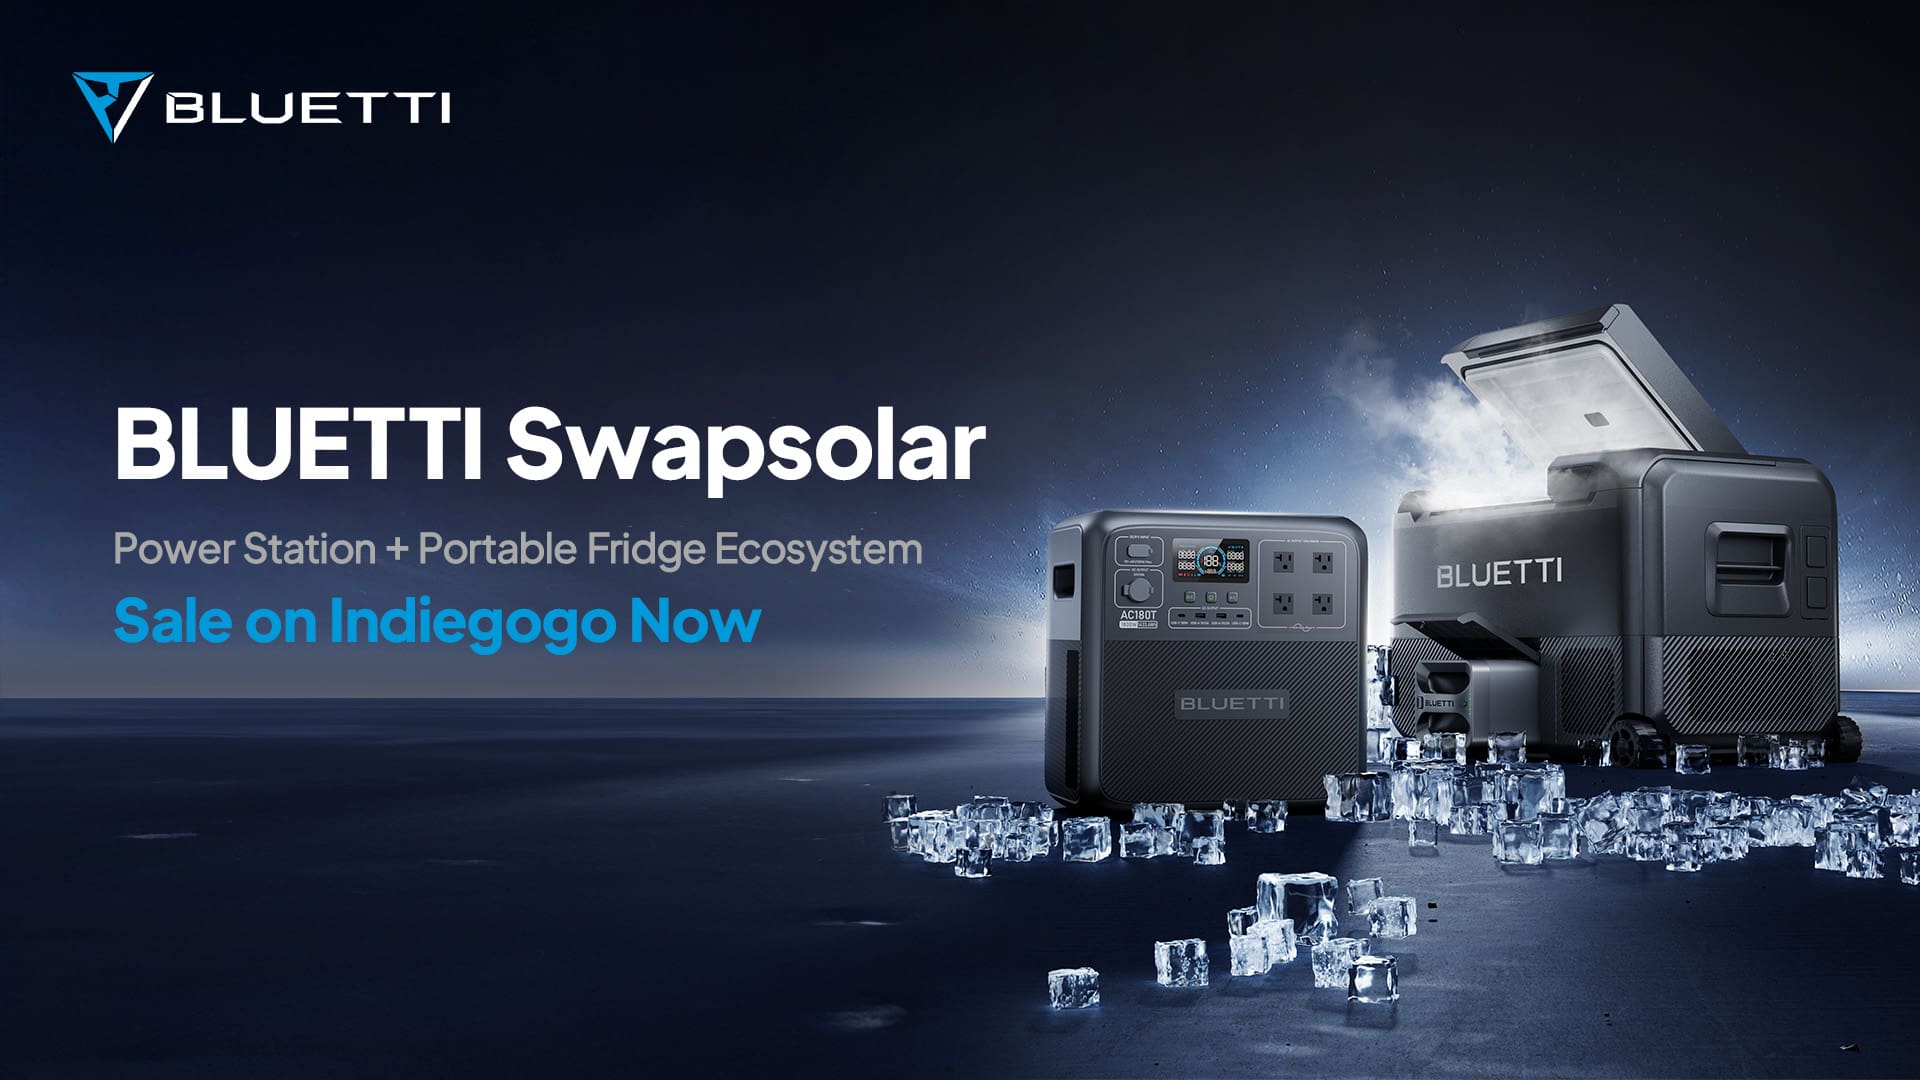 BLUETTI SwapSolar: 5 Things to Know About This Innovative MultiCooler and Power Station Combo